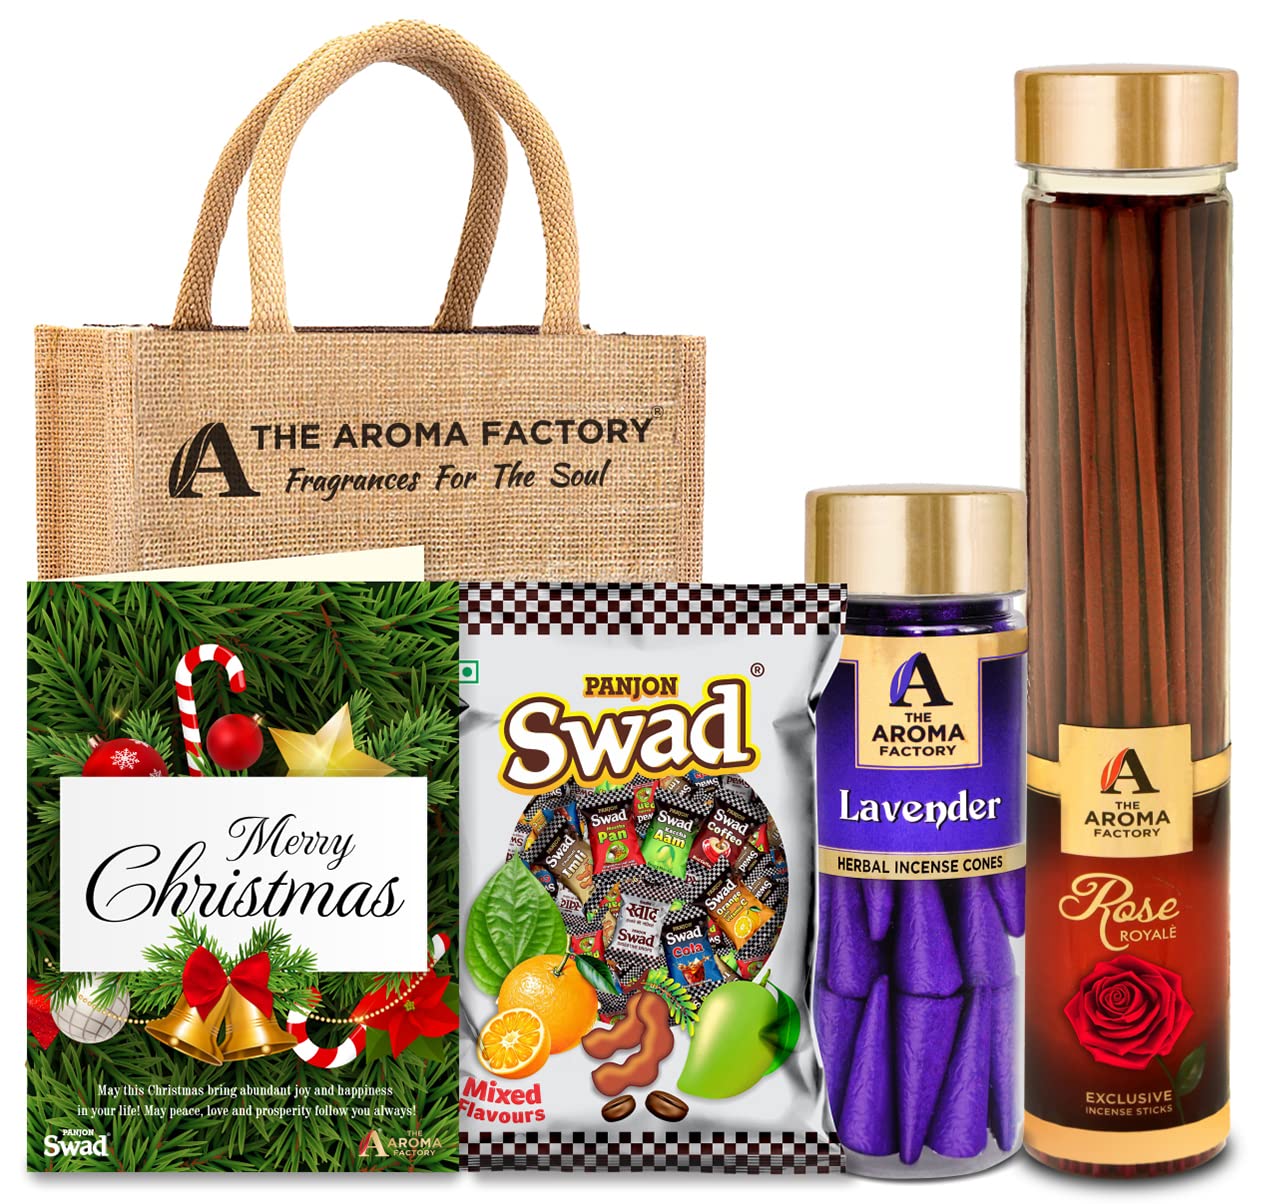 The Aroma Factory Happy Merry Christmas Gift Hamper Set (Swad Mix 25 Candy,Rose Agarbatti, Lavender Dhoopcone, Greeting Card, Jute Bag) Gift Item